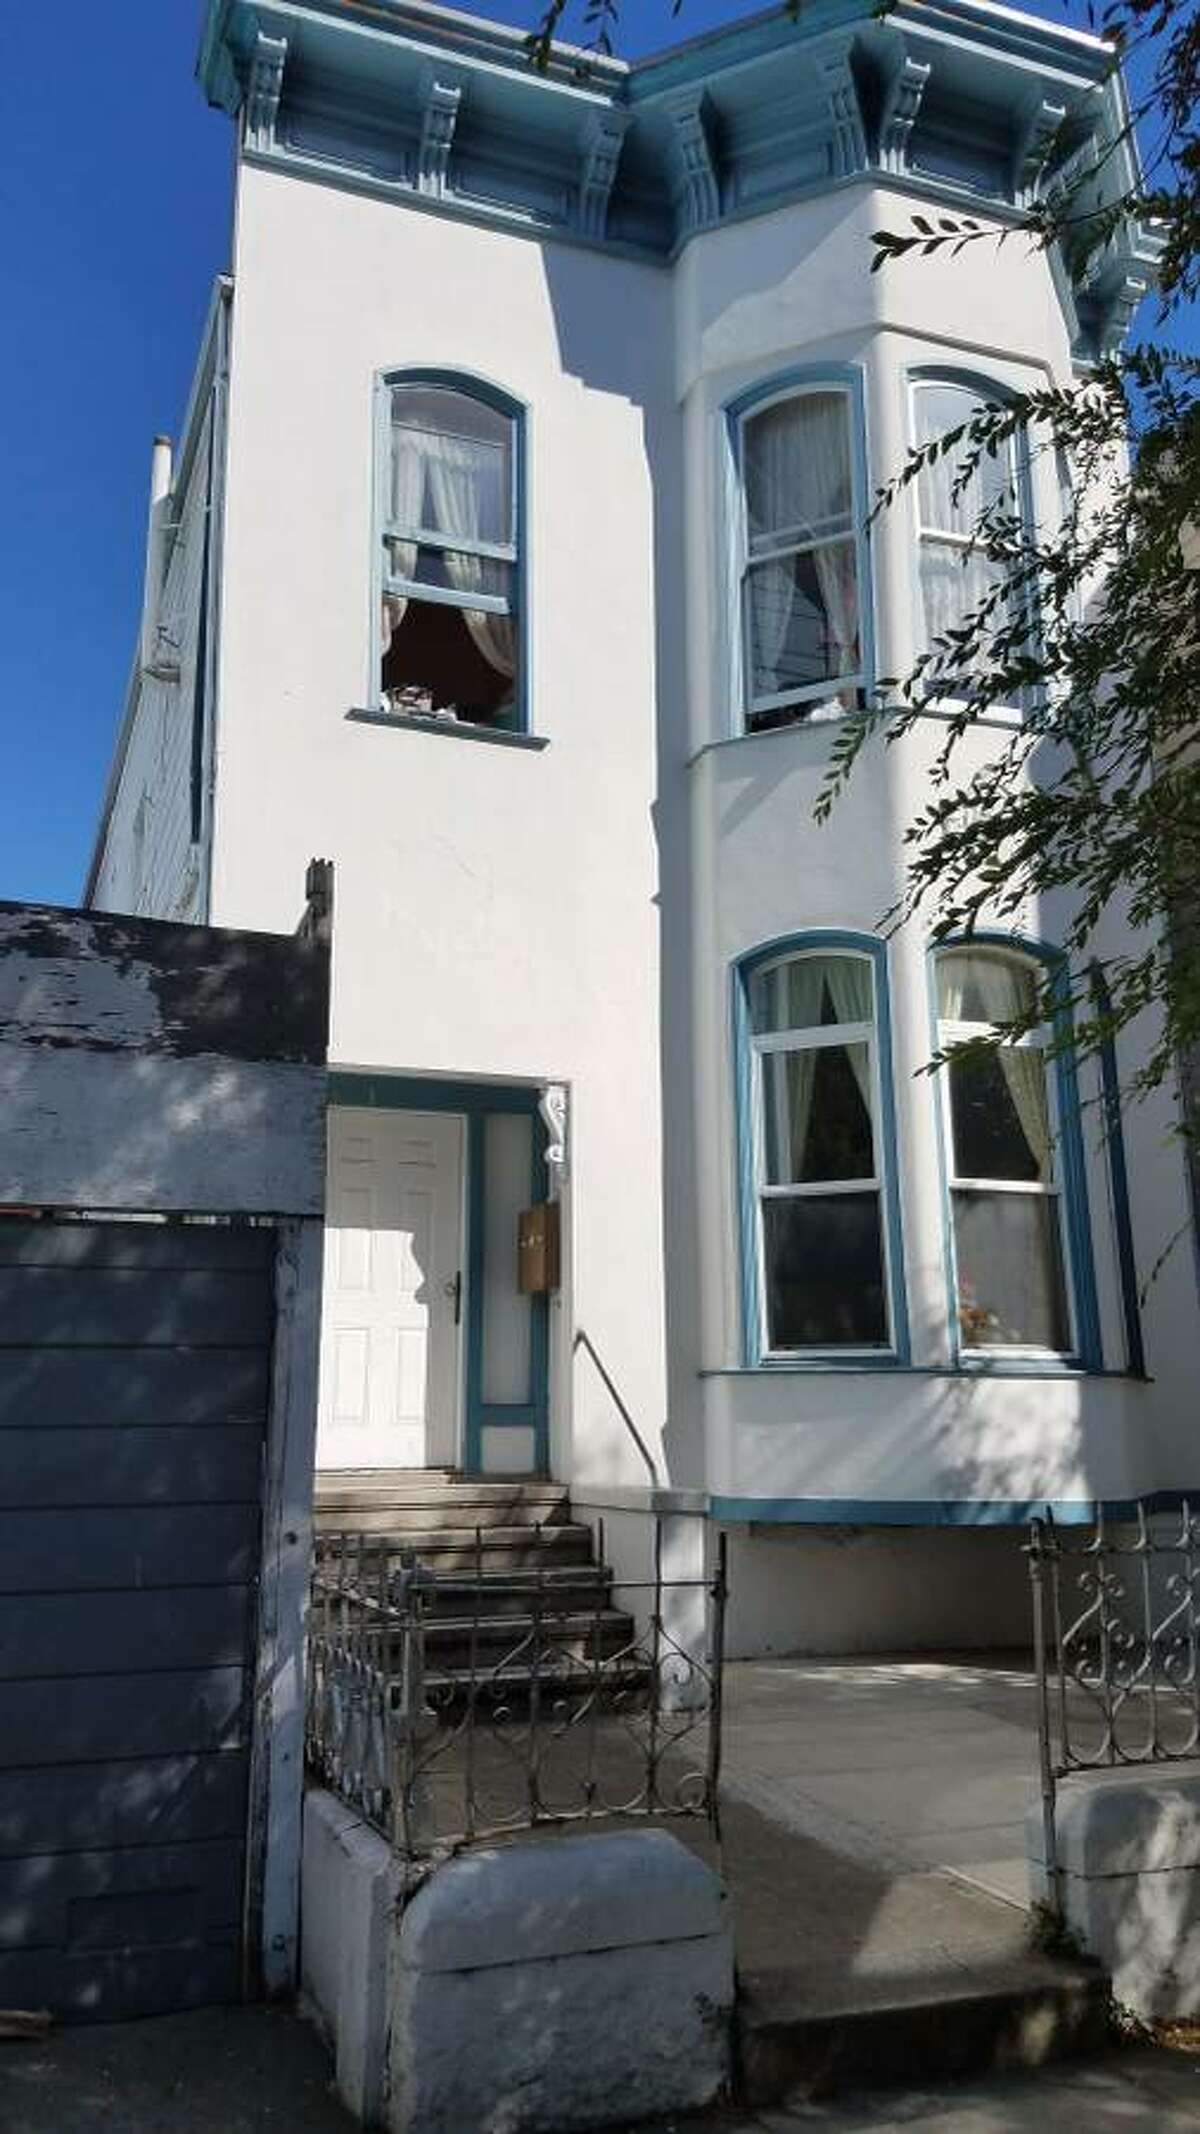 GALLERY: What can you rent in the Mission for $3k? A rare 2 bedroom for $3,000 (most are much more), this apartment is on Folsom between 24th and 25th, offering 975 square feet. Source: Craigslist.